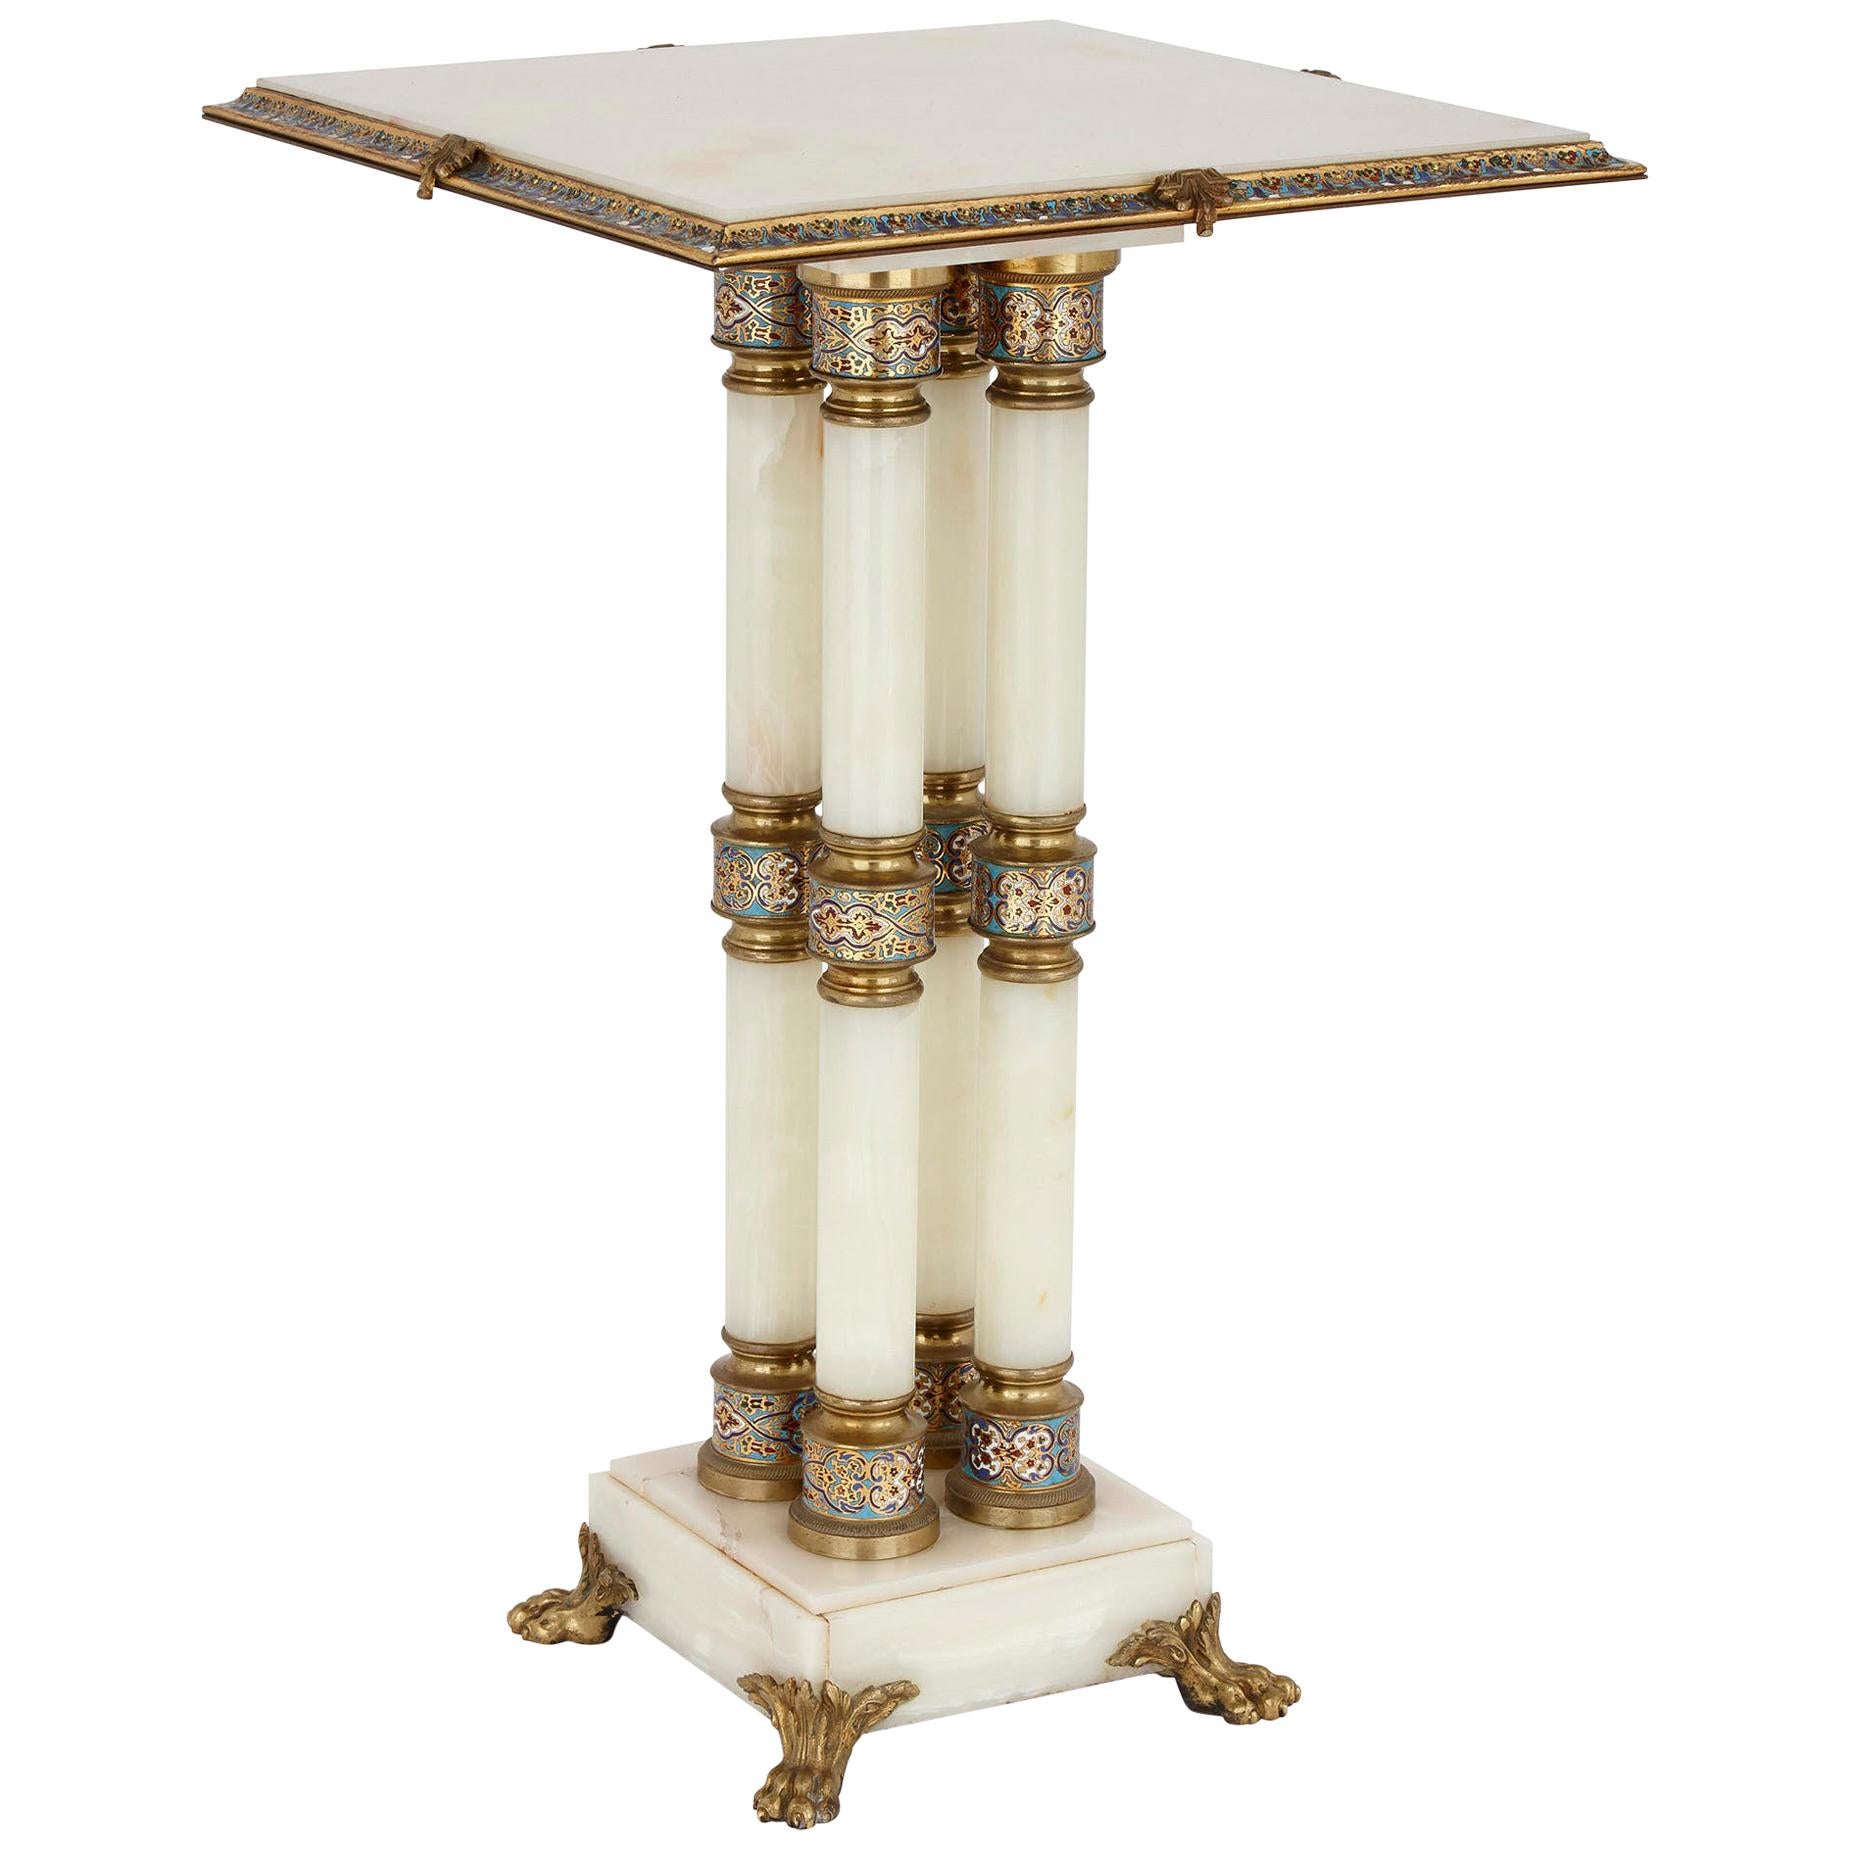 Champlevé and Cloisonné Enamel Mounted White Onyx and Gilt Bronze Table For Sale